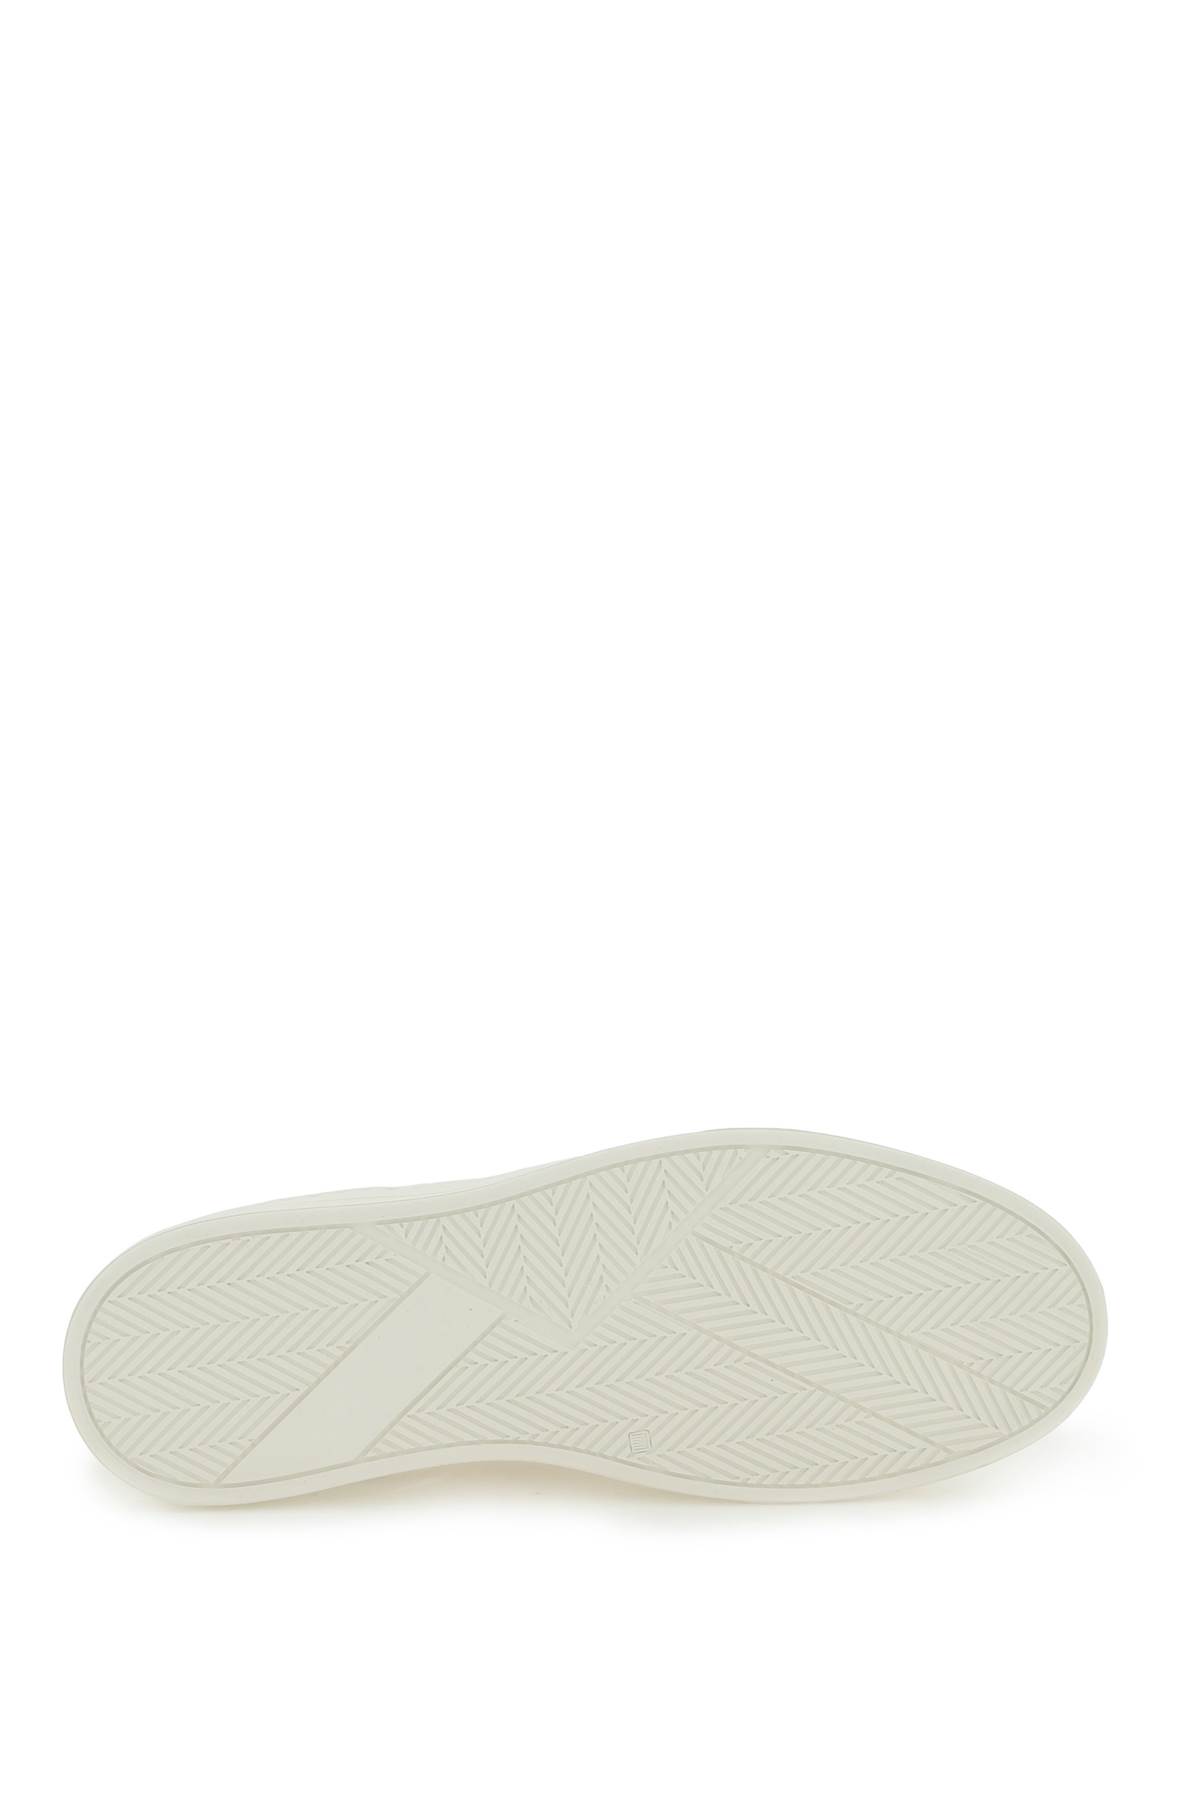 Shop Common Projects Slip-on Sneakers In Off White (white)